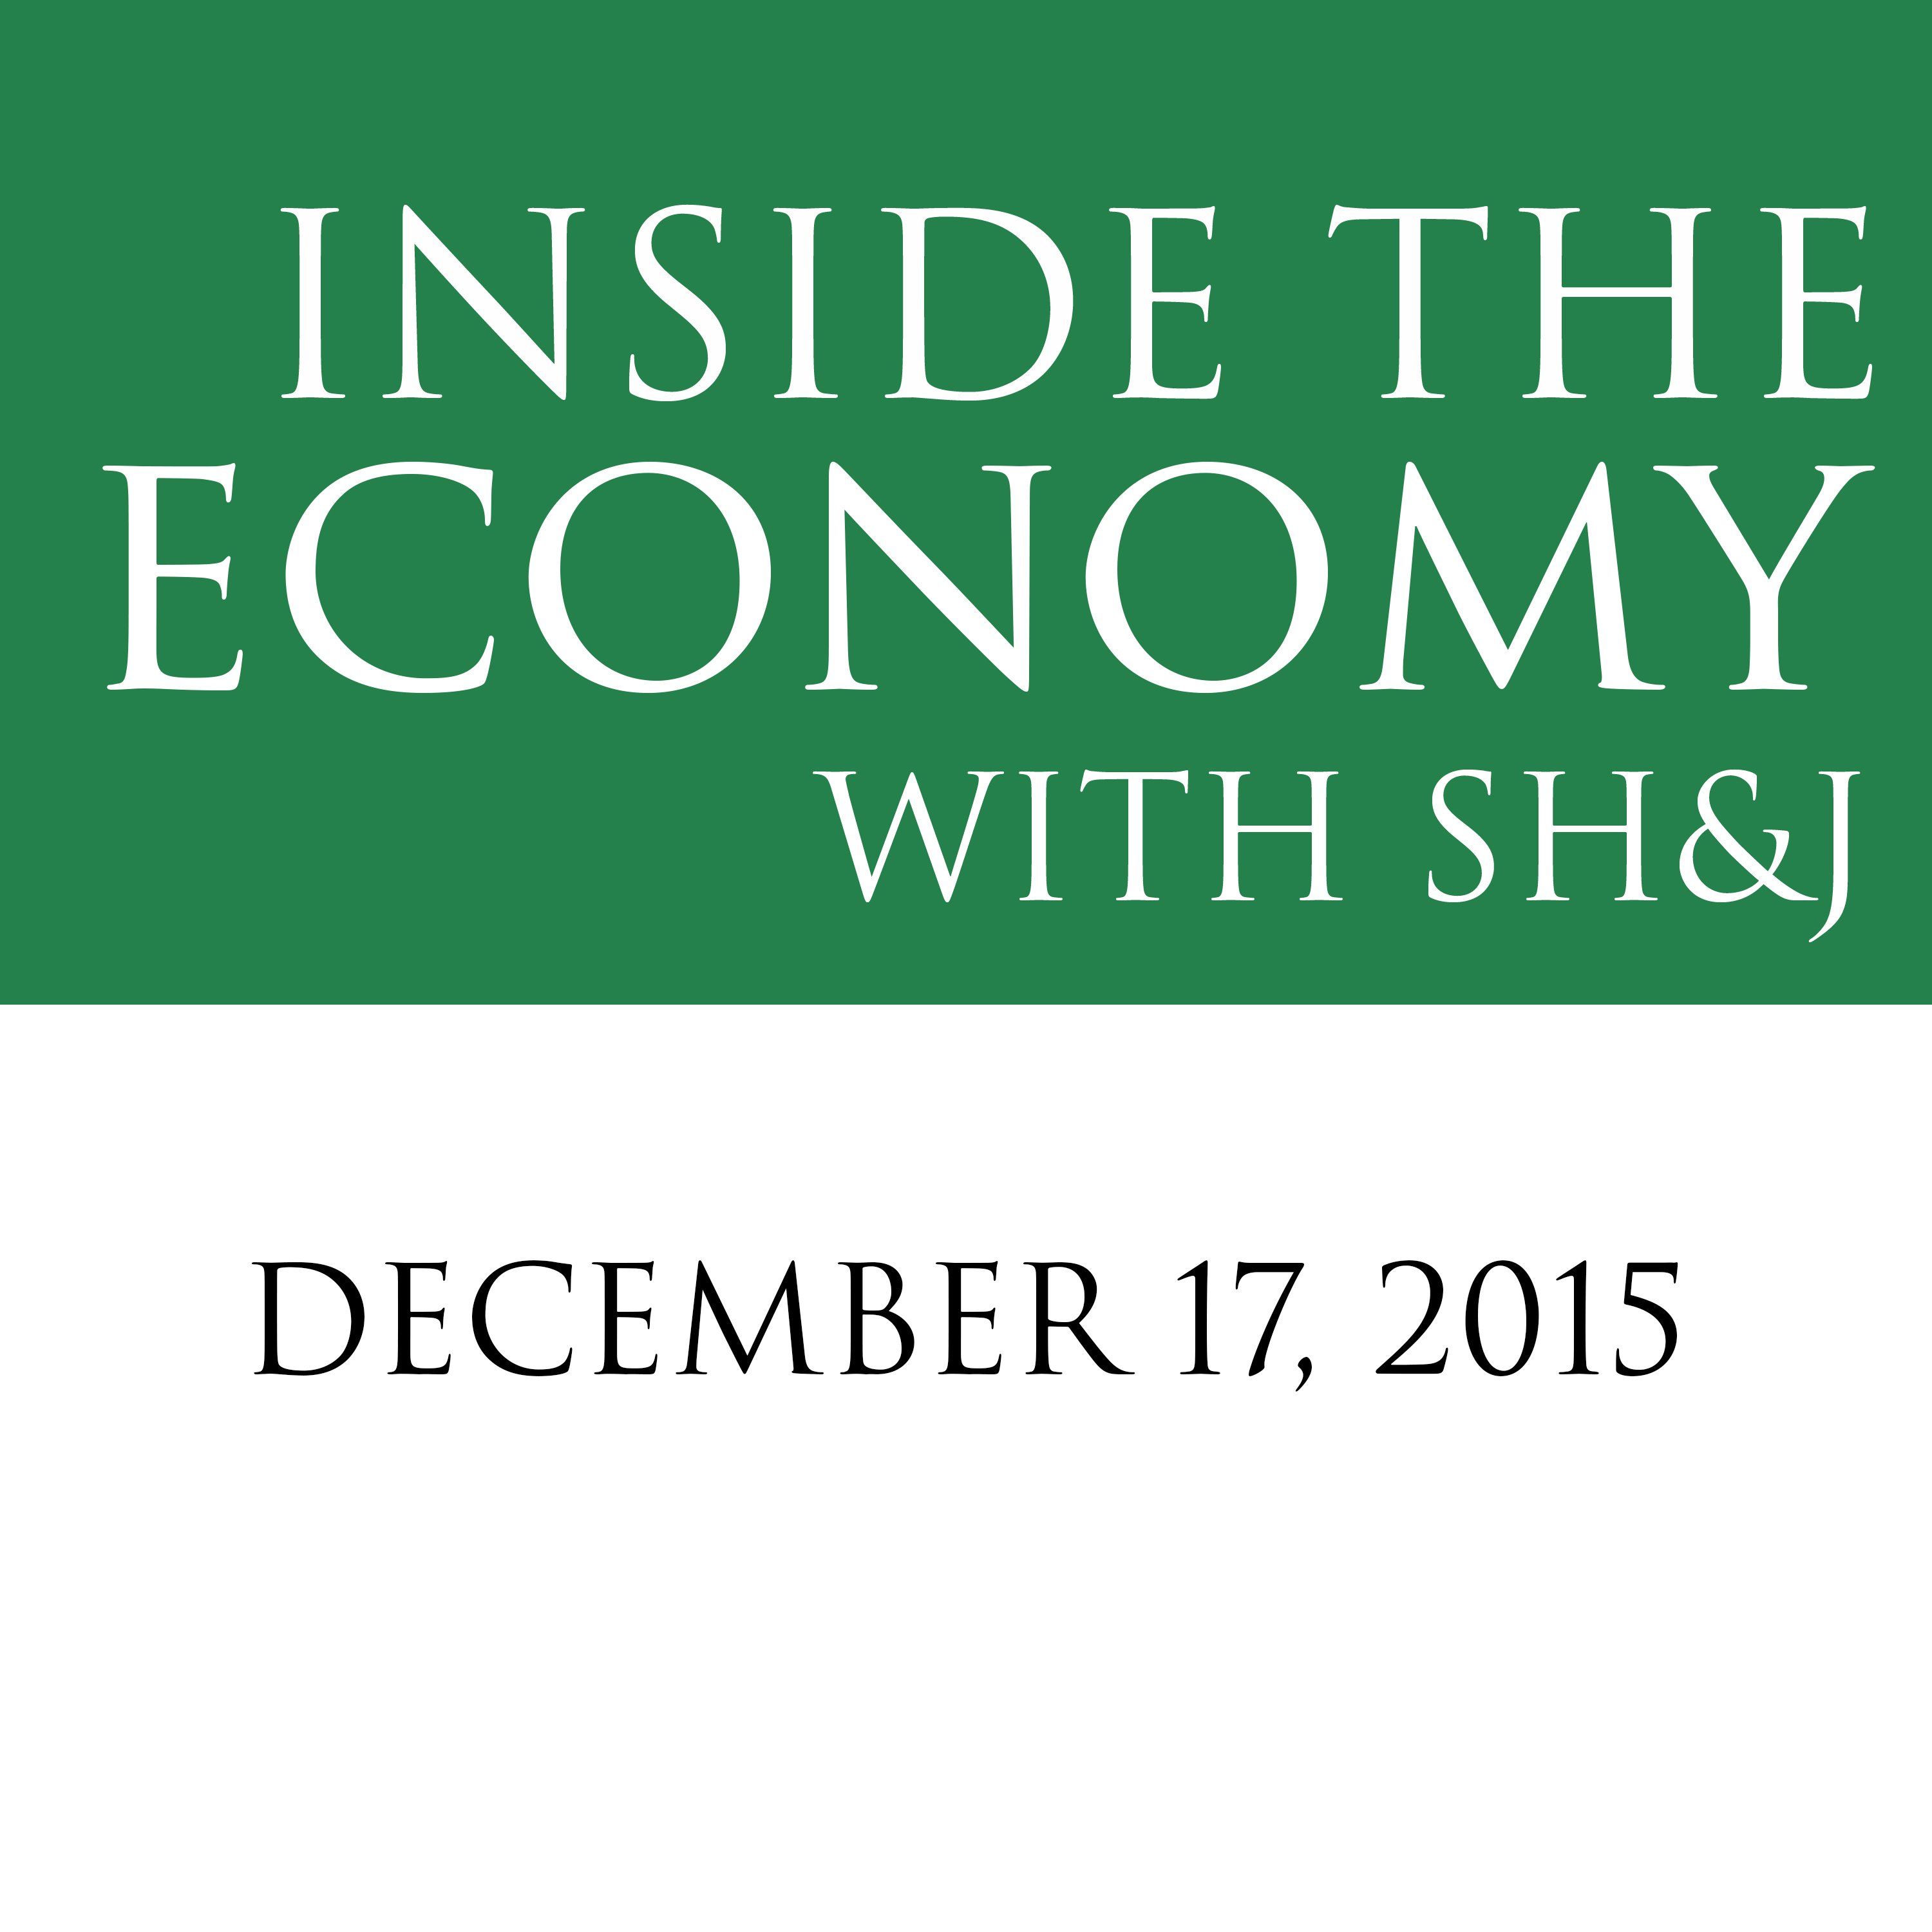 December 17, 2015  --  Inside the Economy with SH&J: Special Edition